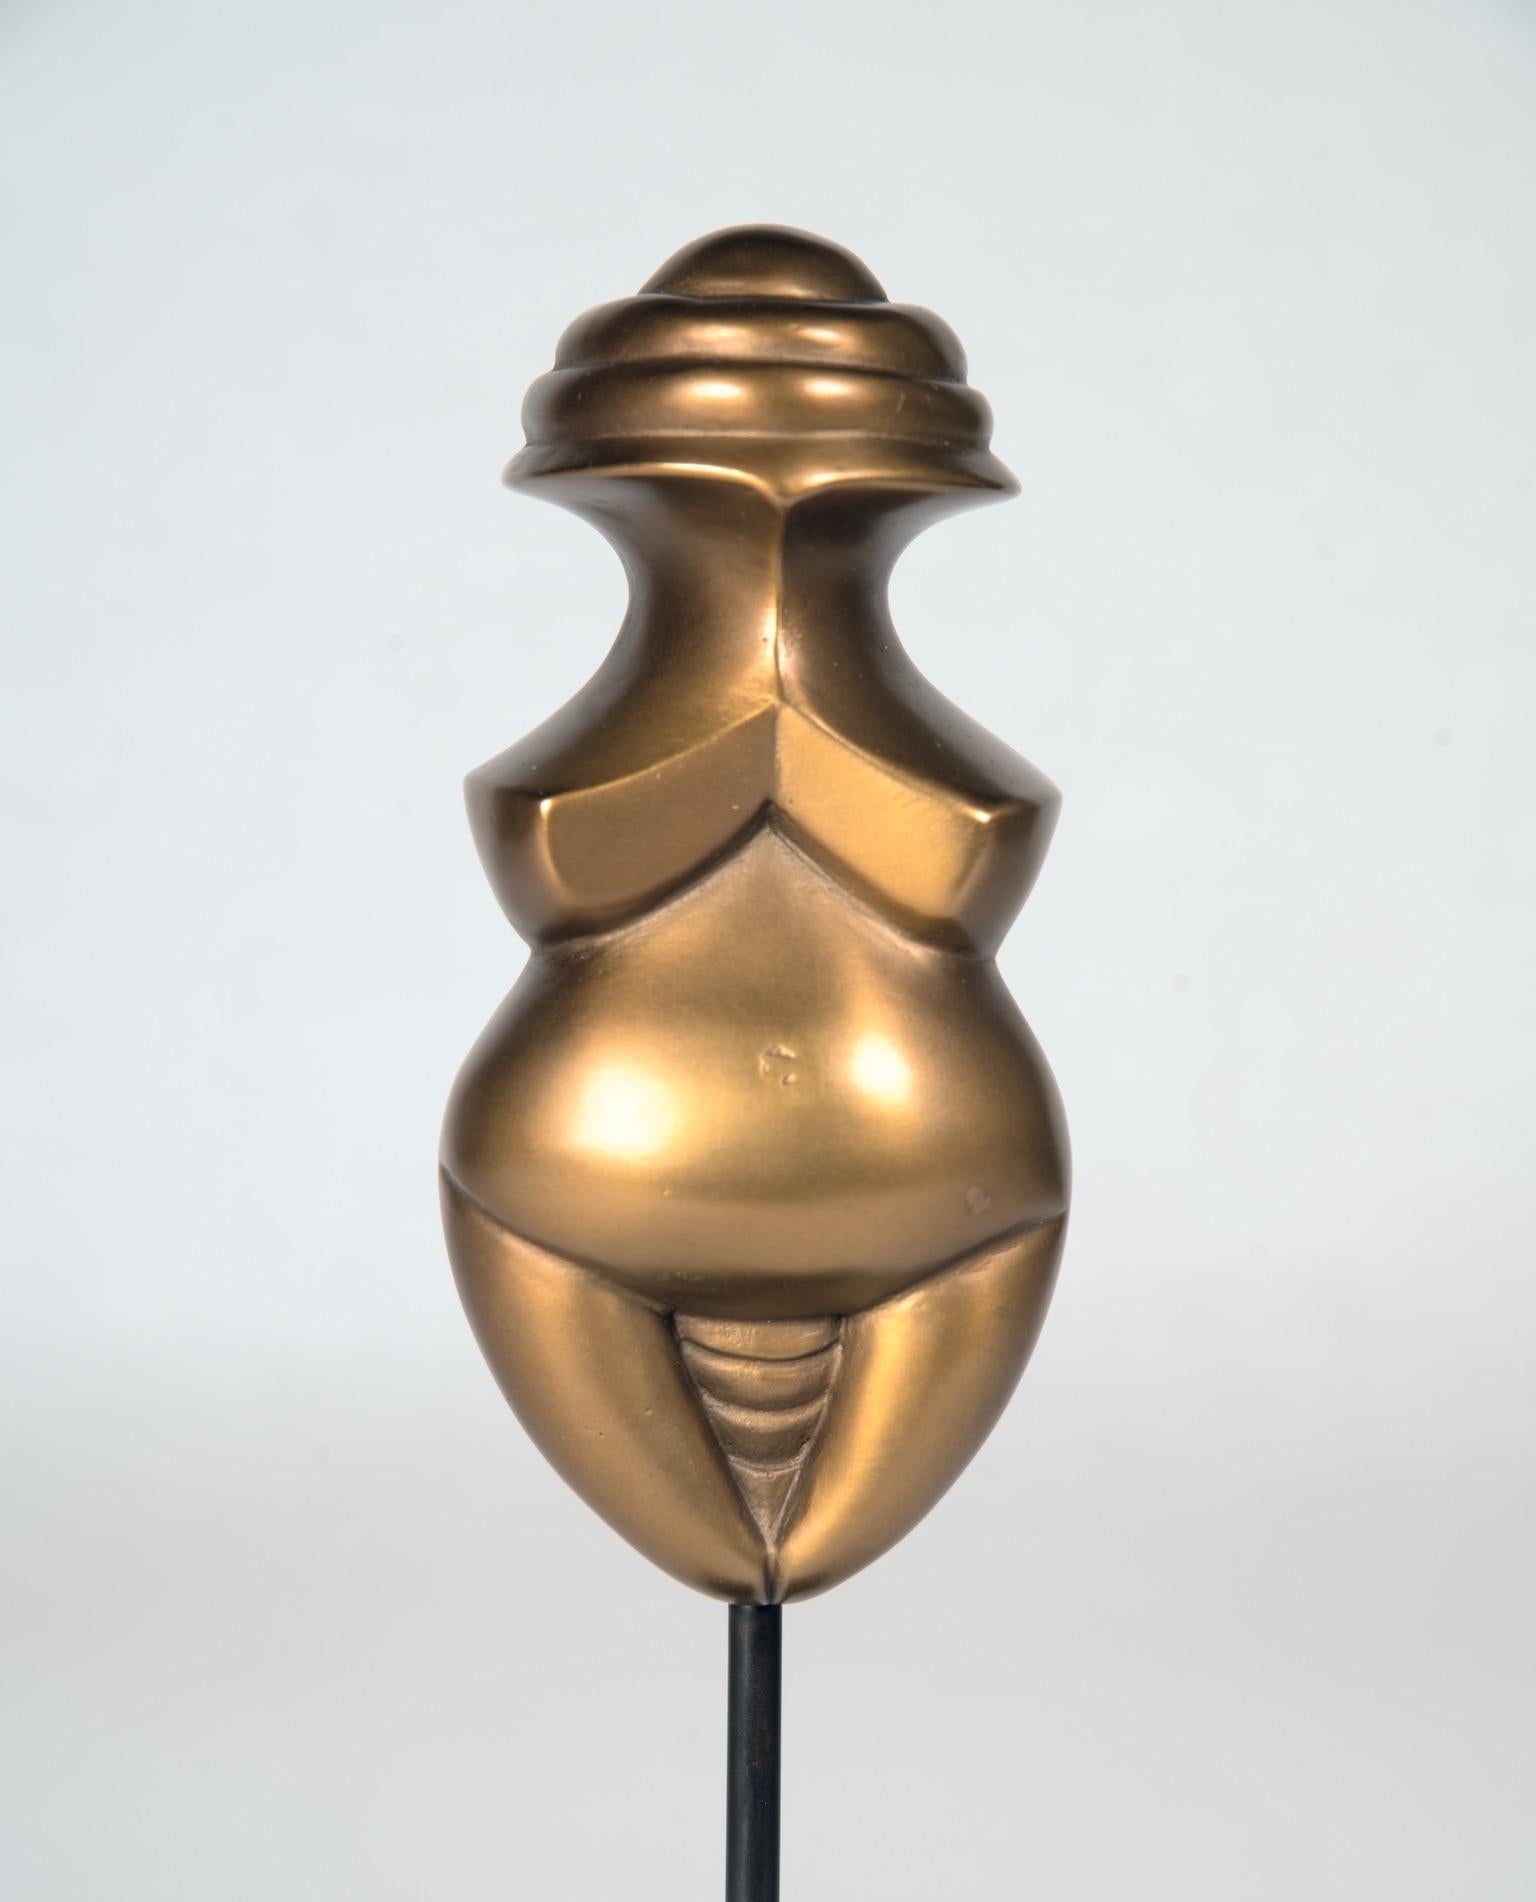 A pioneer of feminist art, Judy Chicago embraces the female body as a source of divinity. For our latest Cultured Commission, we partnered with Prospect NY to present the artist's bronze reimagination of the iconic Venus of Willendorf.

"I was